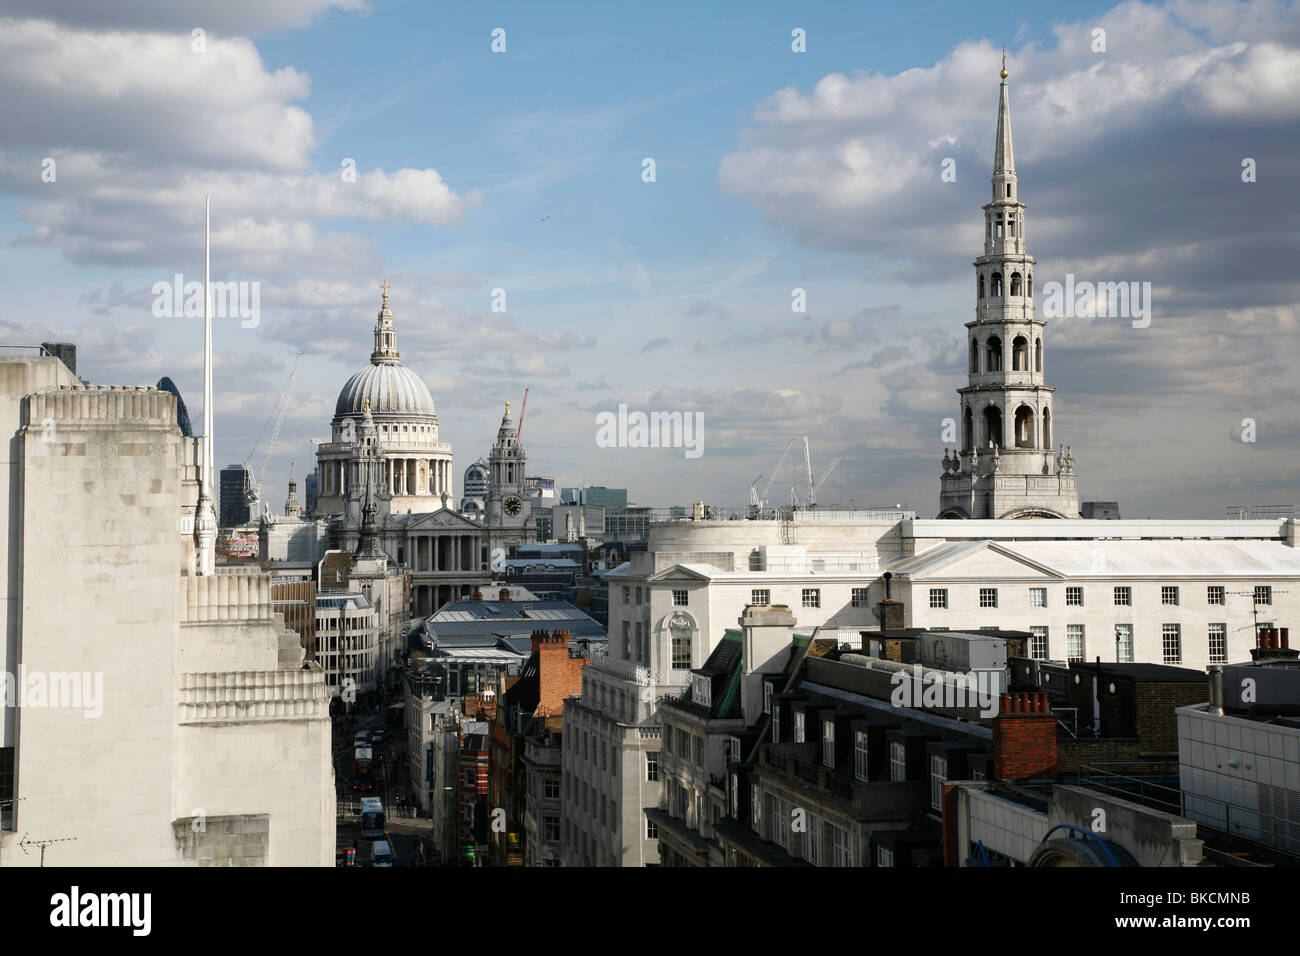 Roofline view of St Paul's Cathedral and St Bride's church, City of London, UK. Taken from Fleet Street. Stock Photo